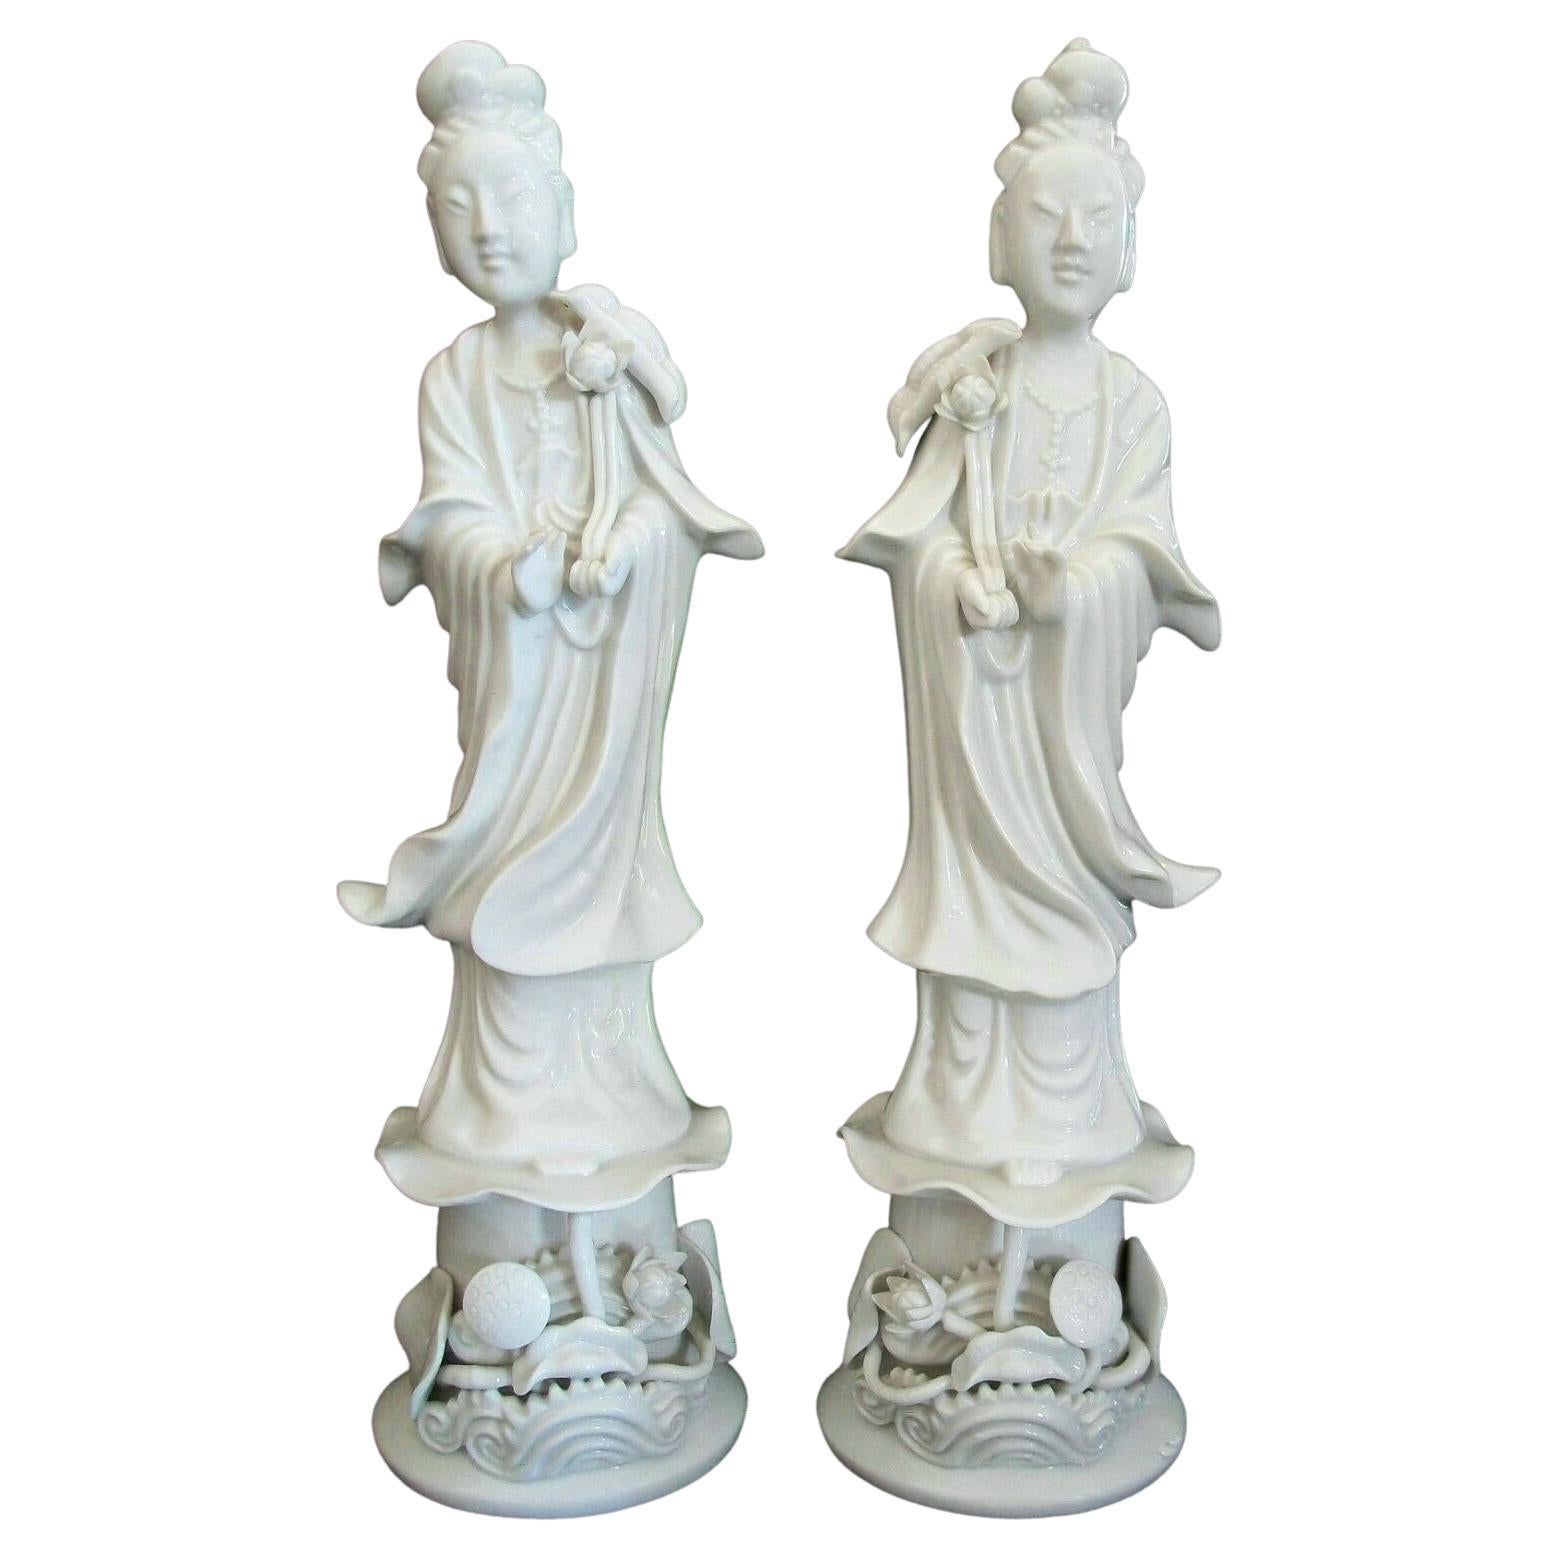 Vintage Pair of 'Blanc De Chine' Porcelain Guanyin Statues, China, circa 1950 For Sale